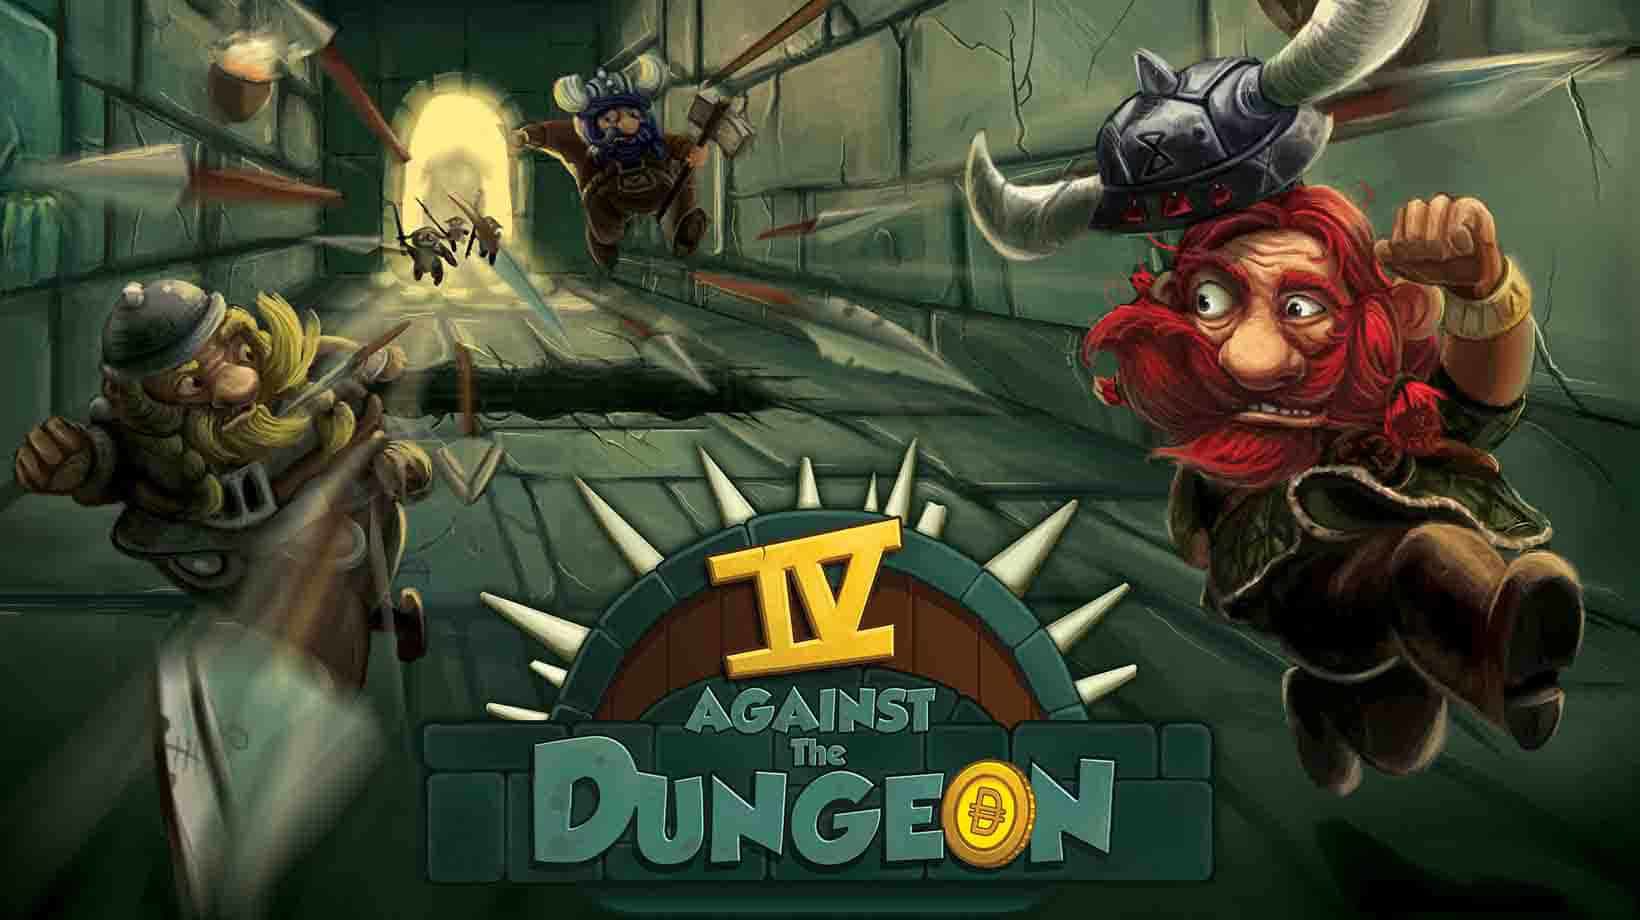 4 against the dungeon